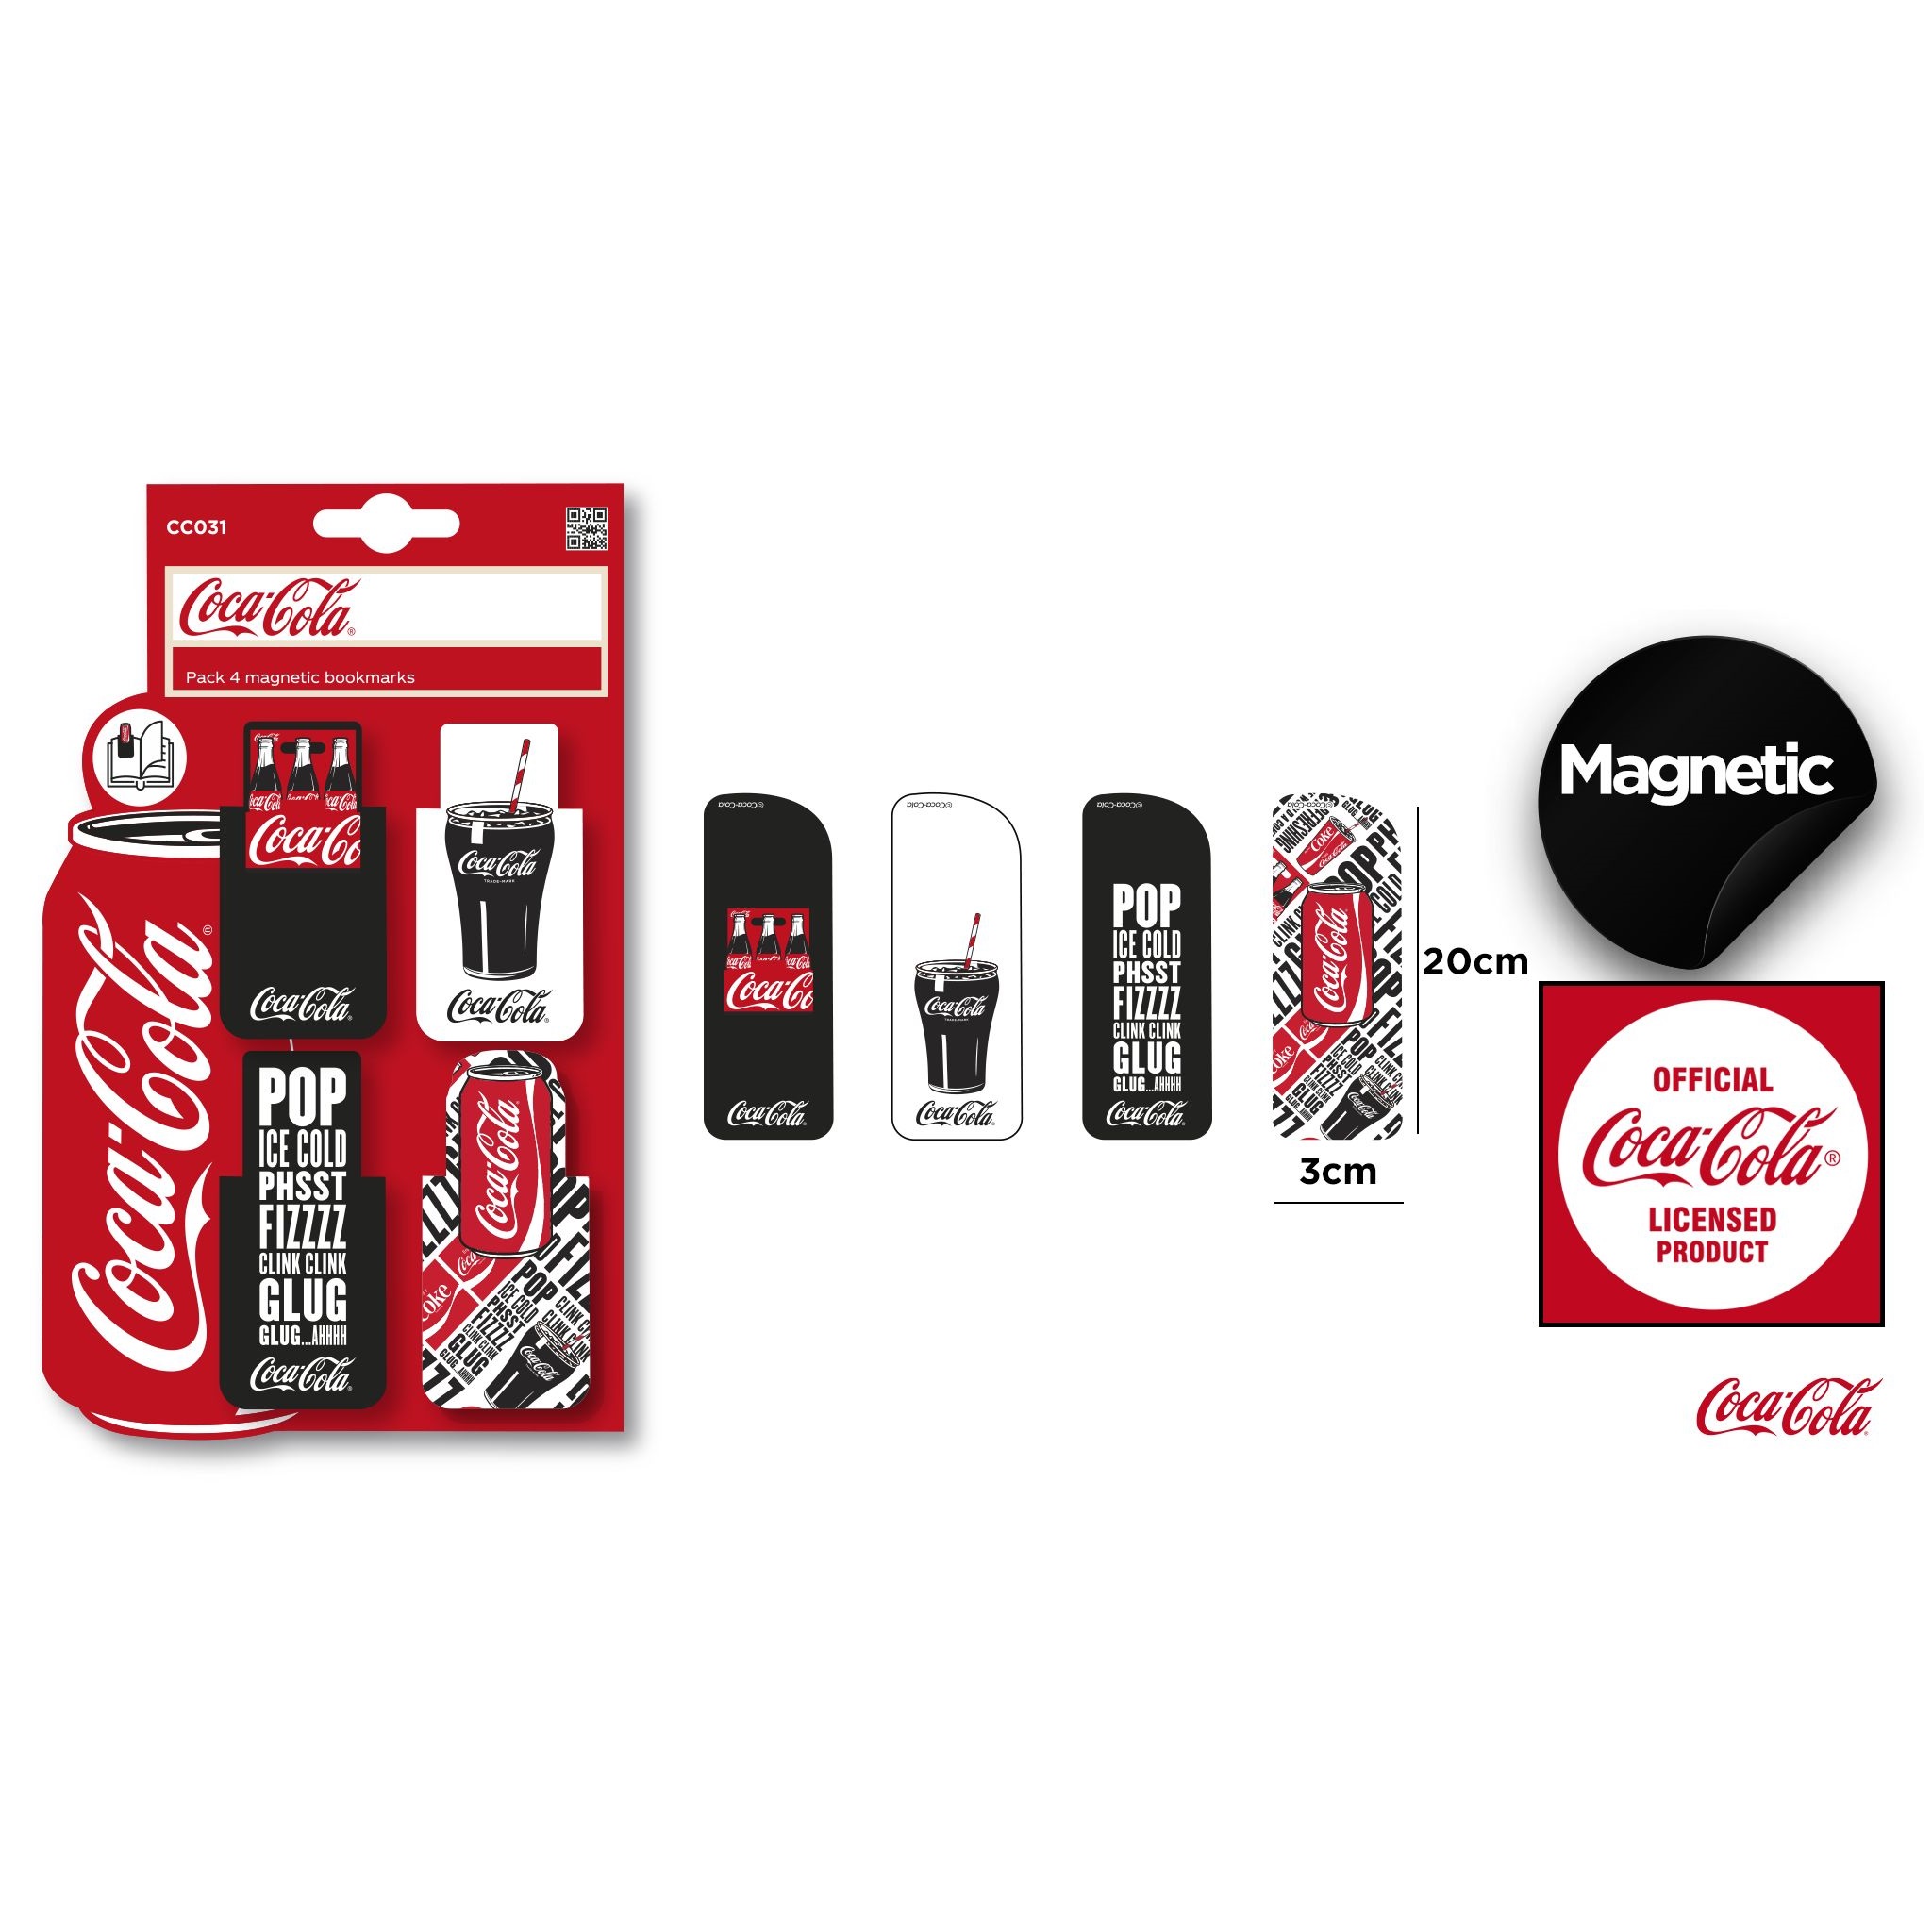 CC031 Coca-Cola Magnetic Bookmarks Personalized Page Marker